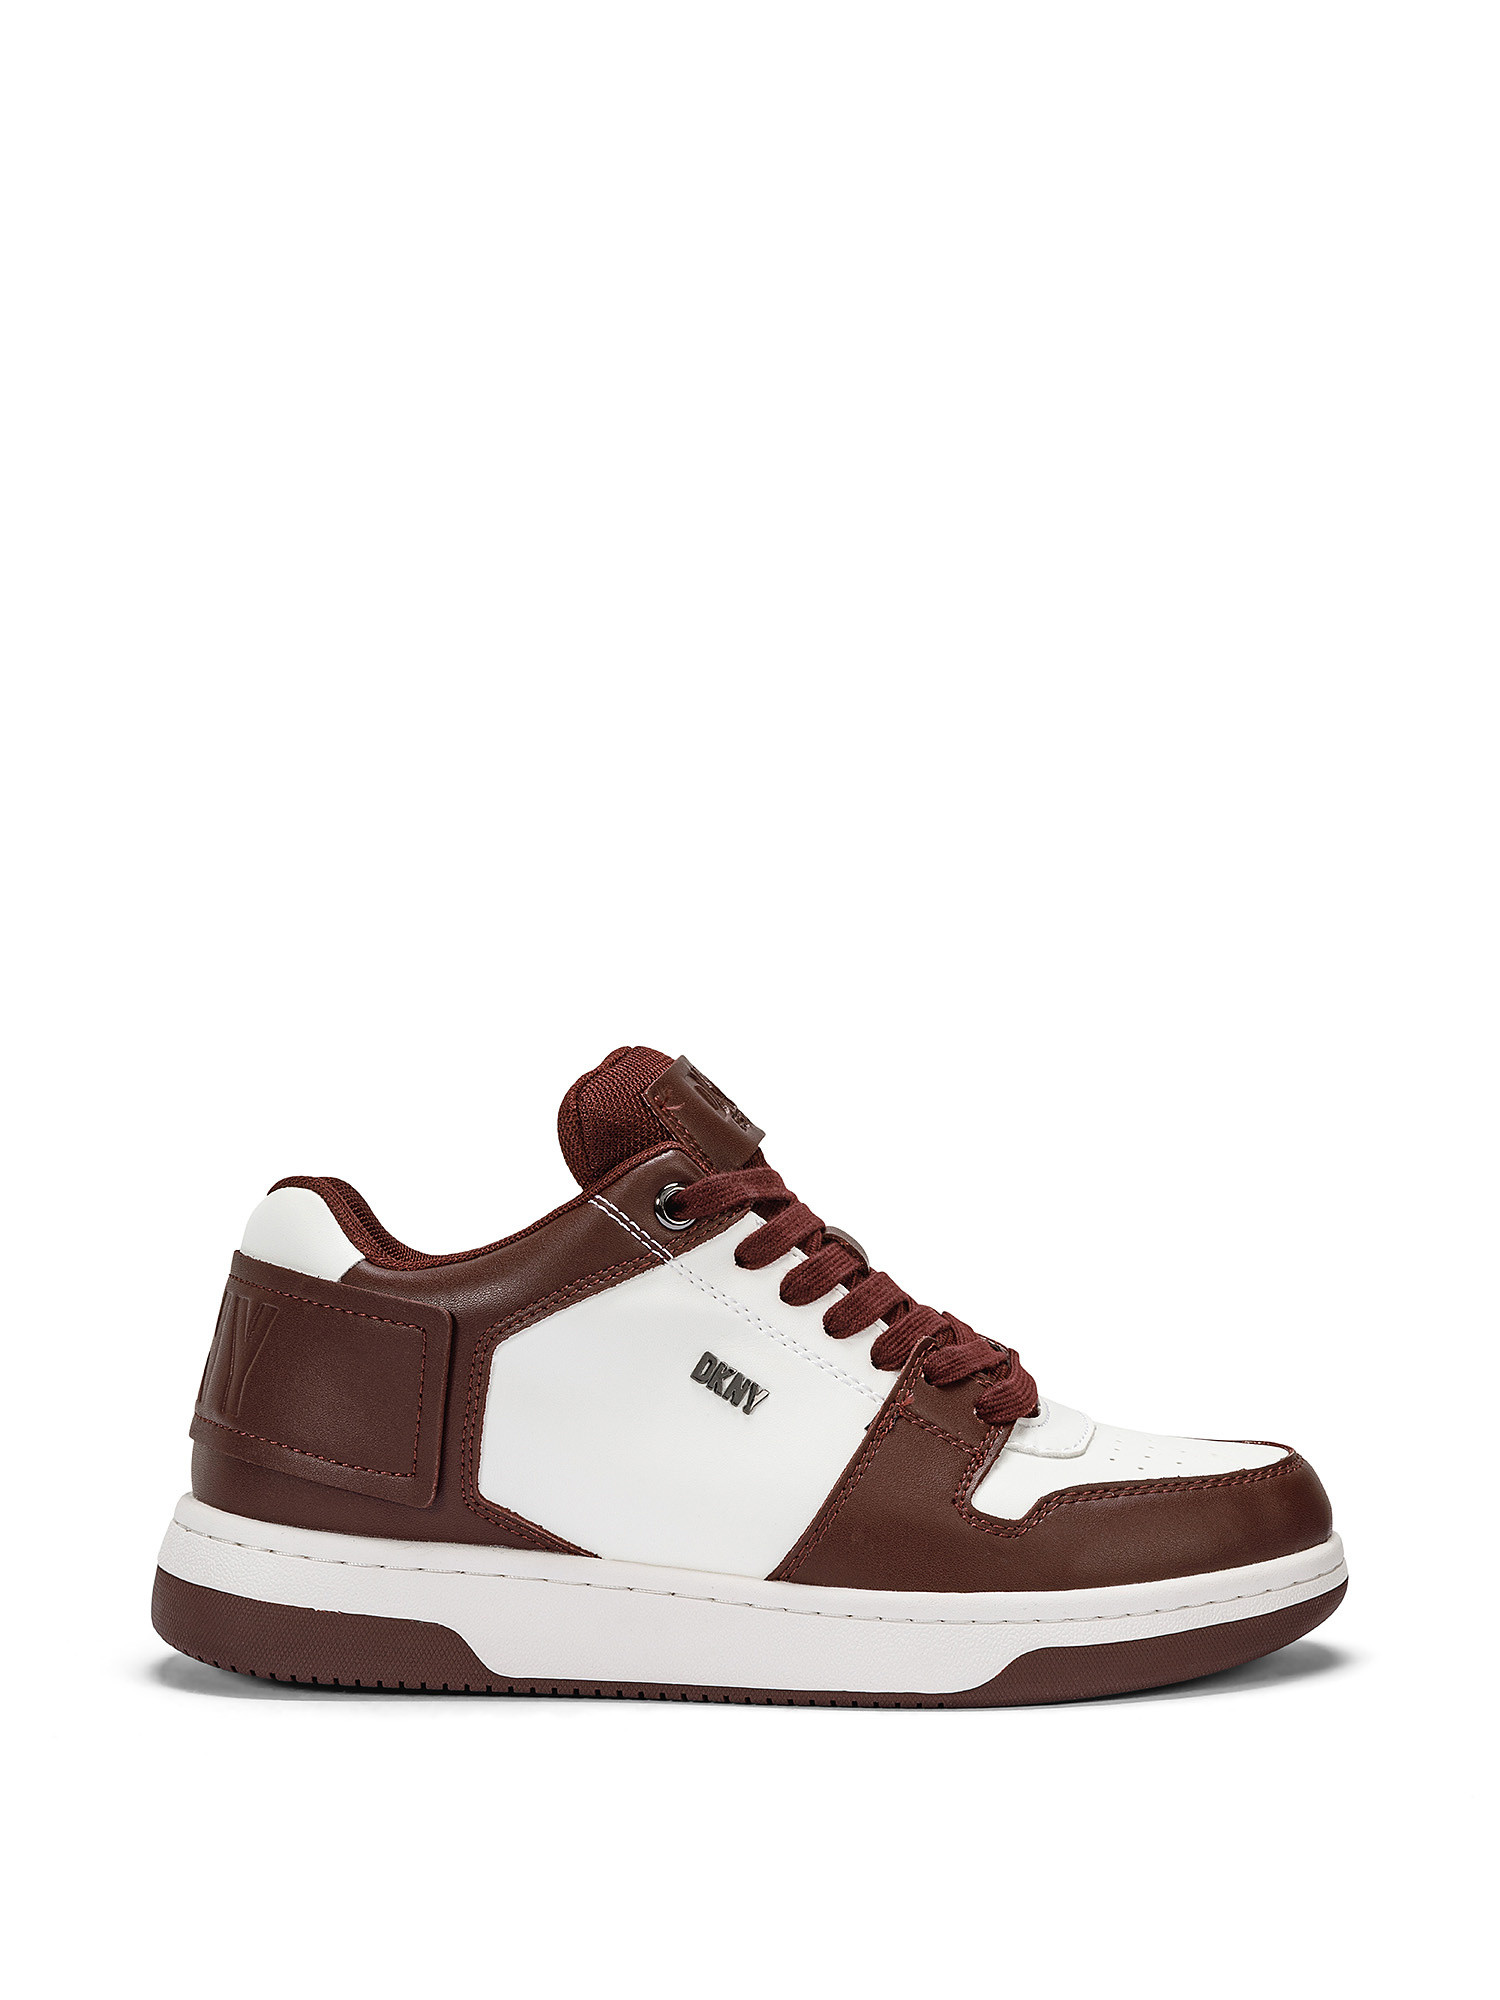 DKNY - Sneaker with Ozone logo, White, large image number 0